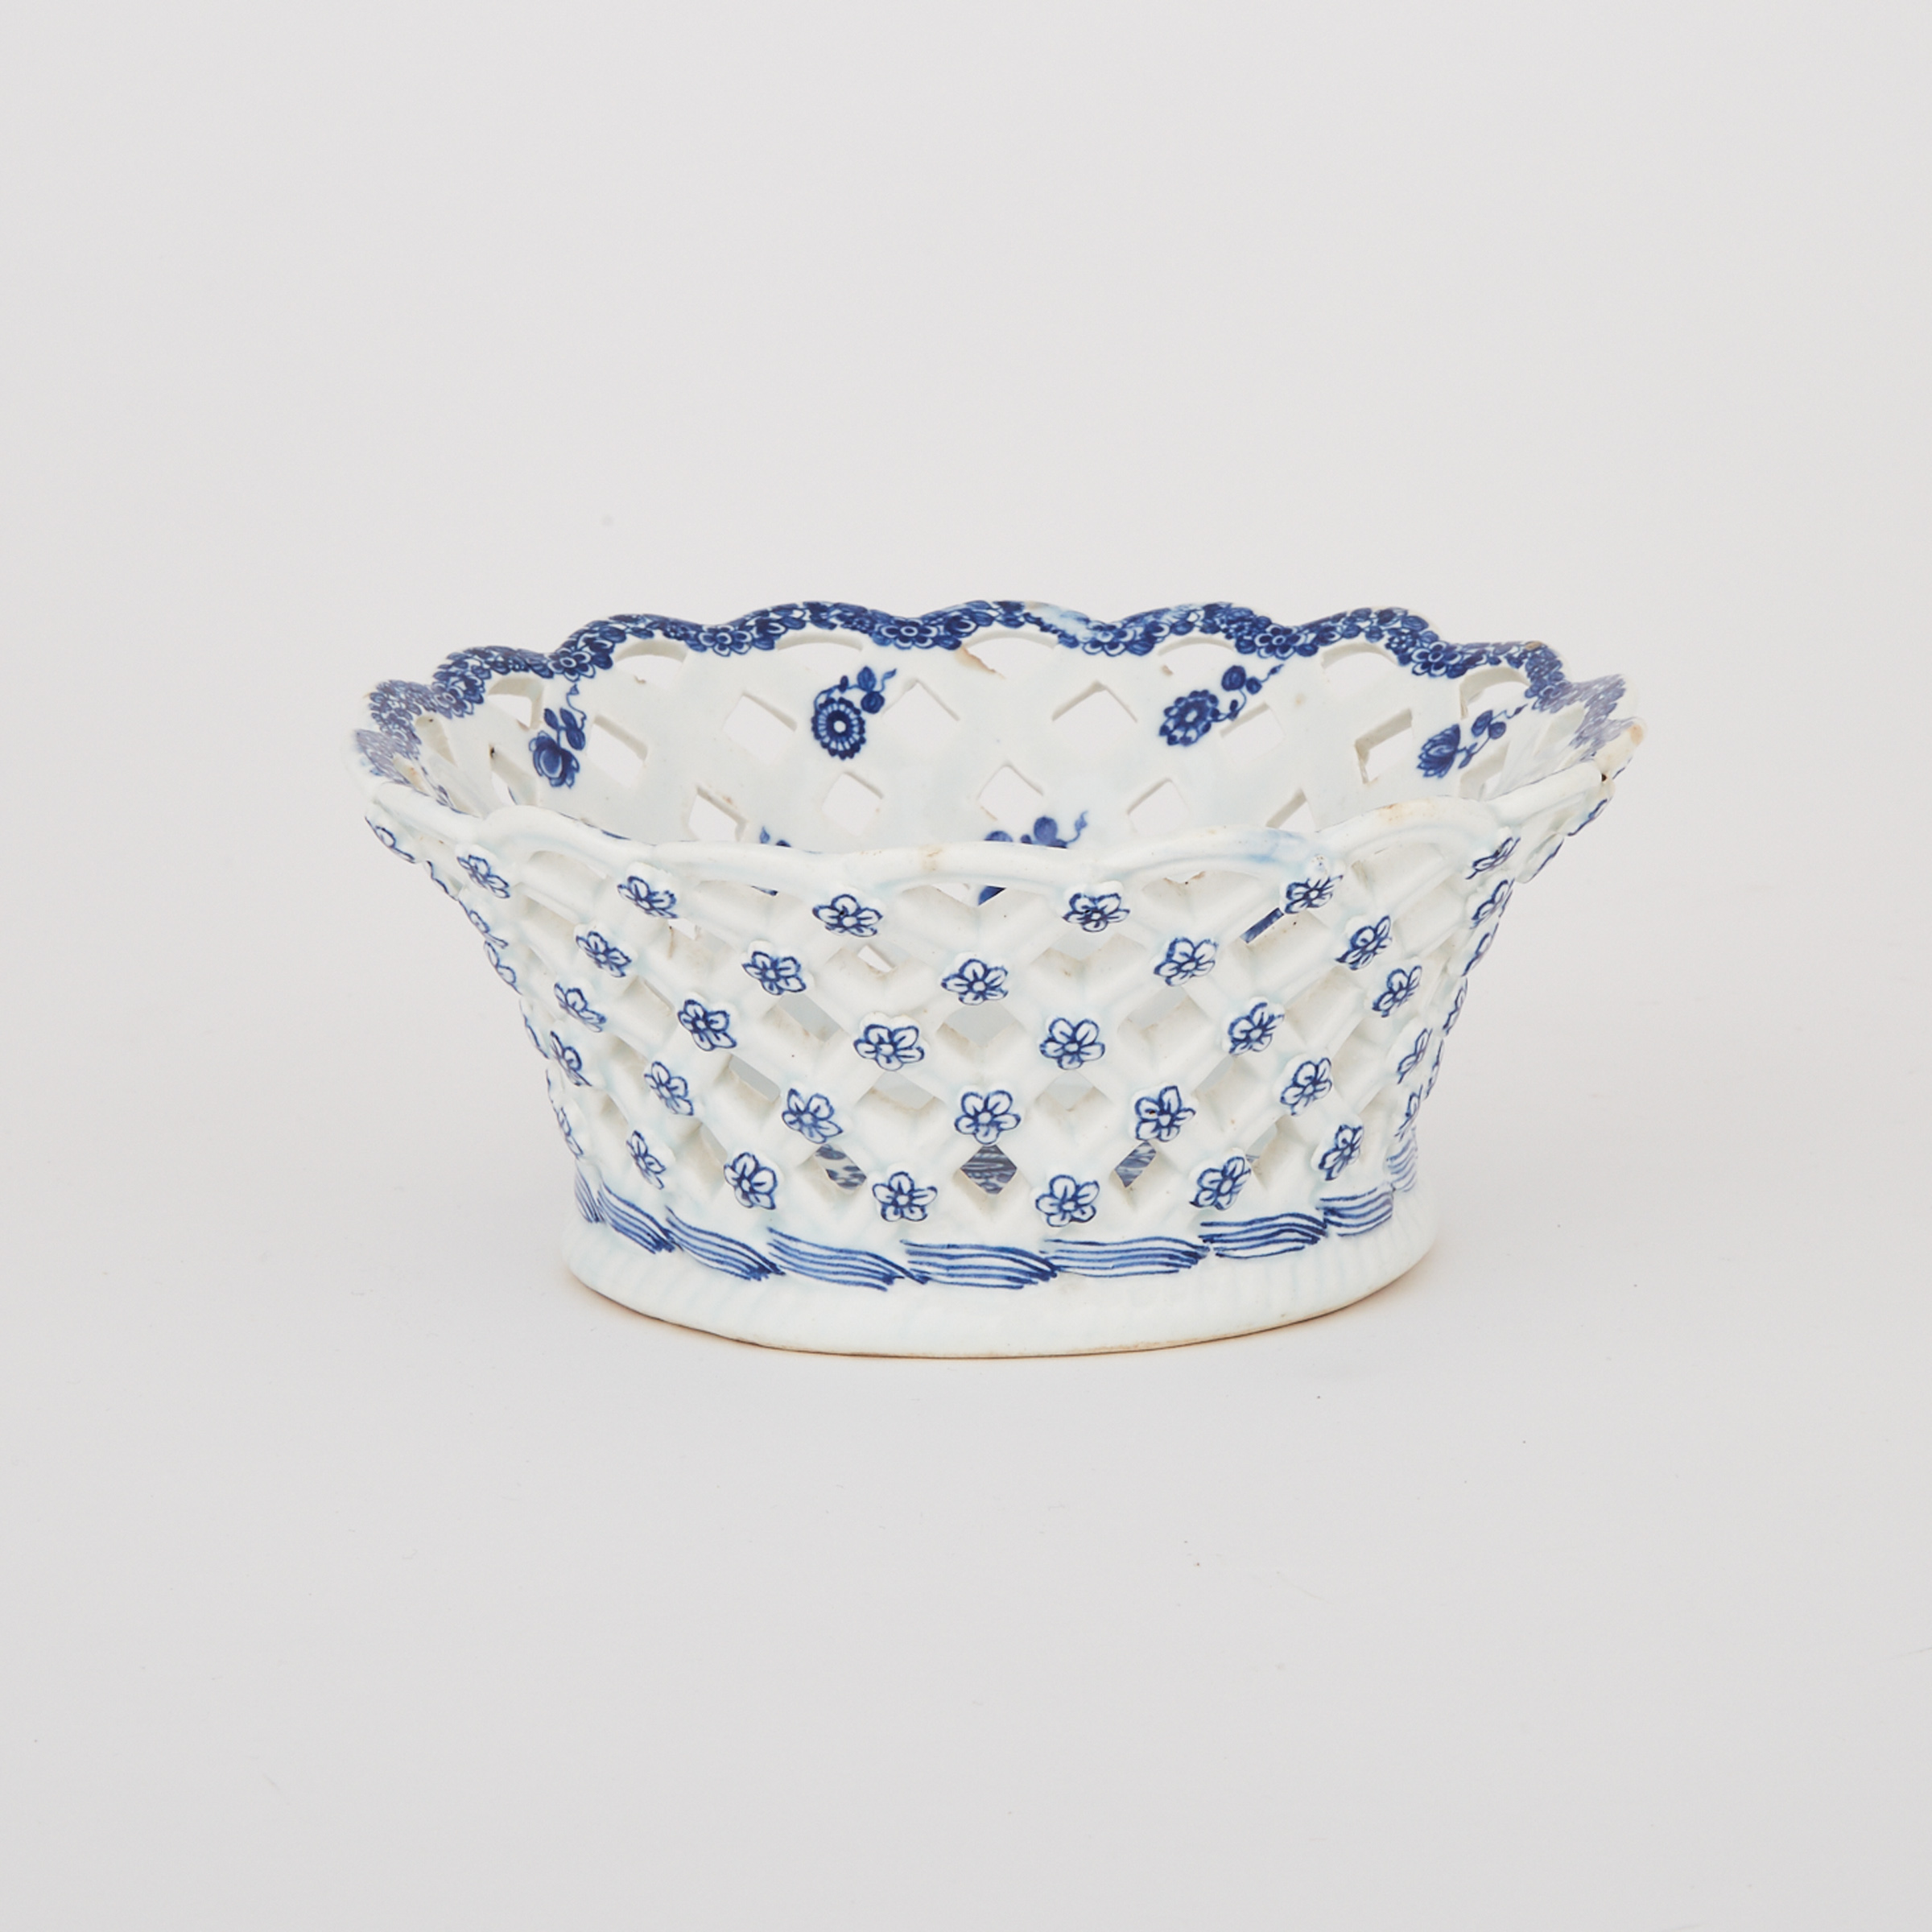 Bow Blue and White Circular Basket, c.1765